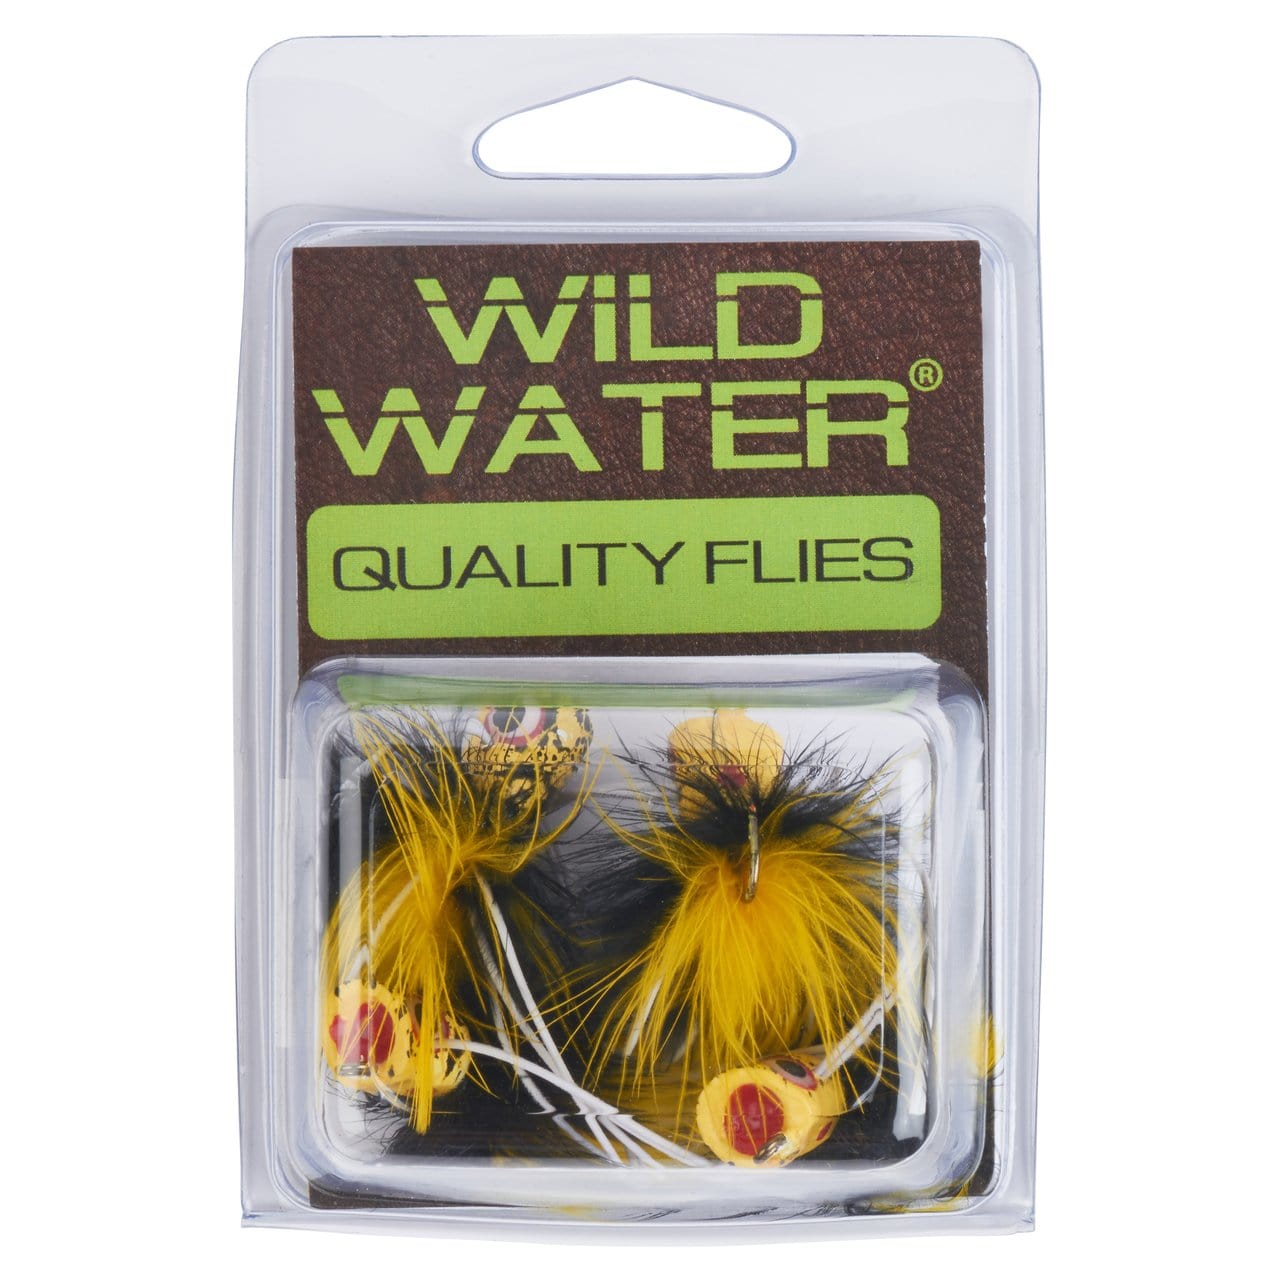 Wild Water Fly Fishing Black and Yellow Concave Face Mini Panfish Popper, Size 6, Qty. 4